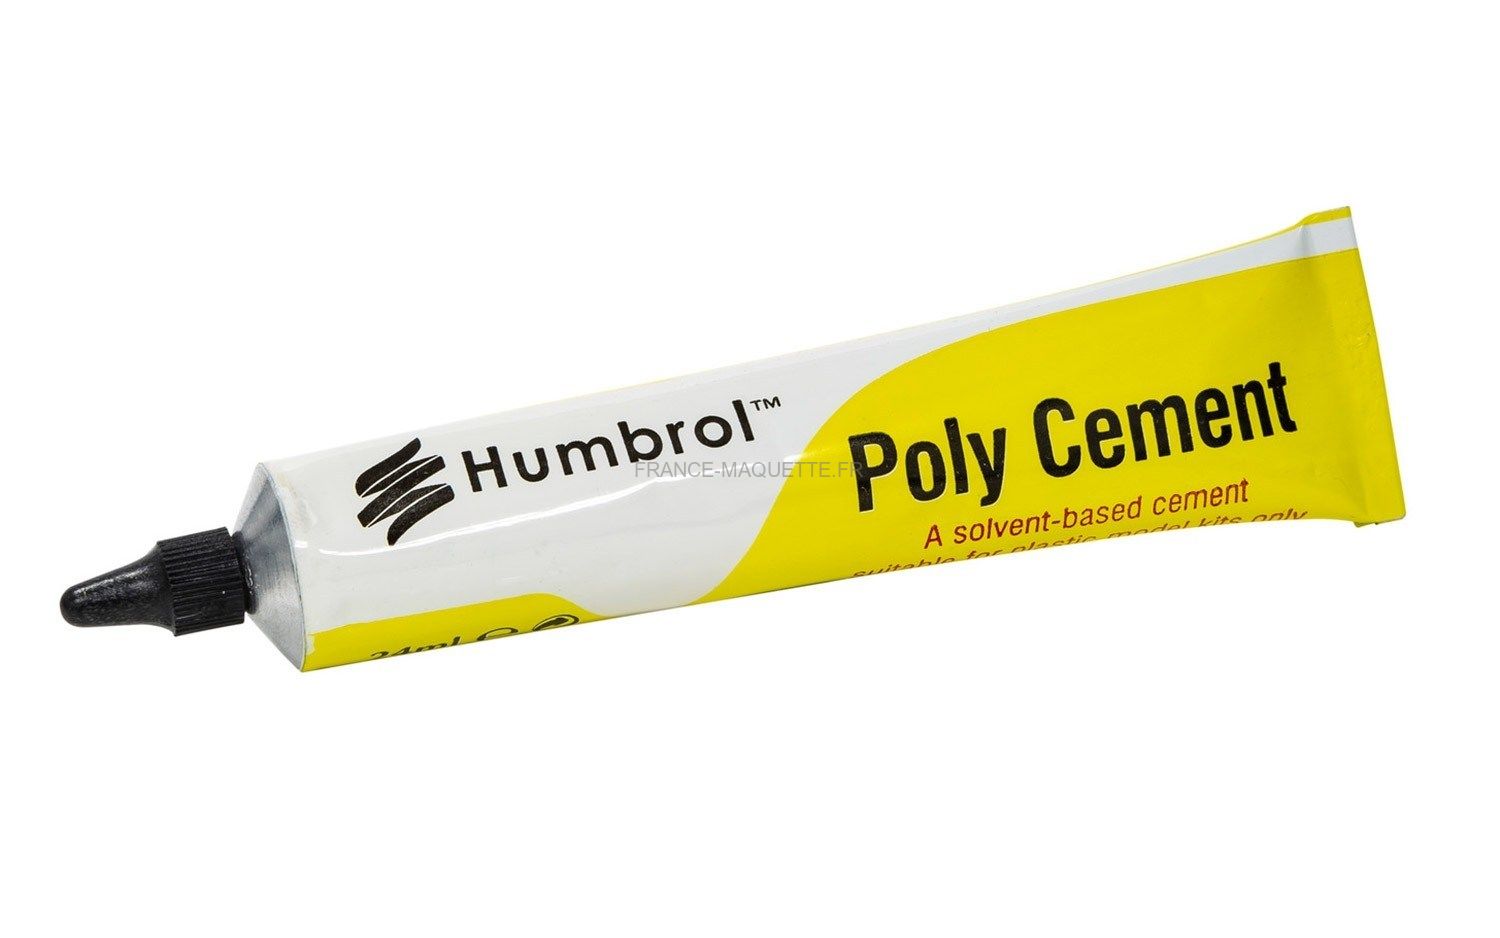 Humbrol AE4422 - Tube de colle Poly Cement - 24 ml